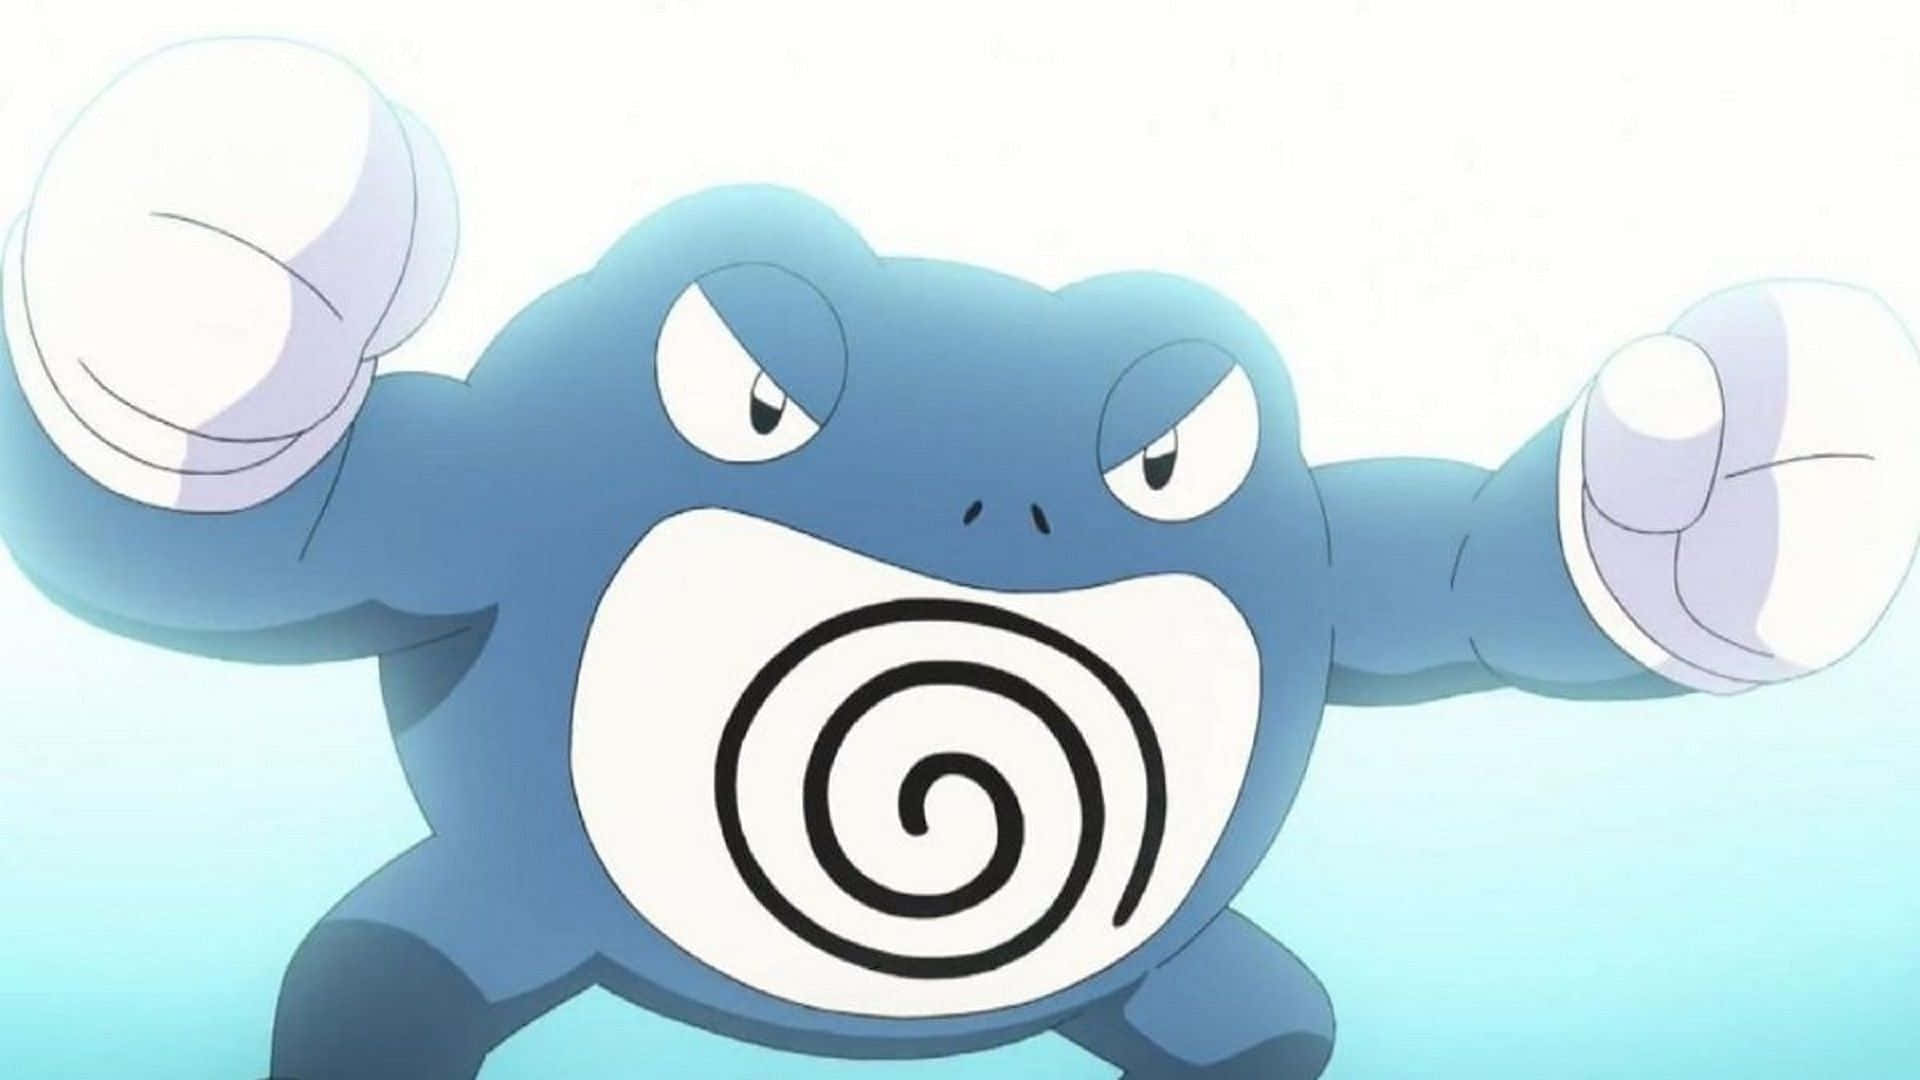 Angry Poliwrath With Fists Clenched Wallpaper